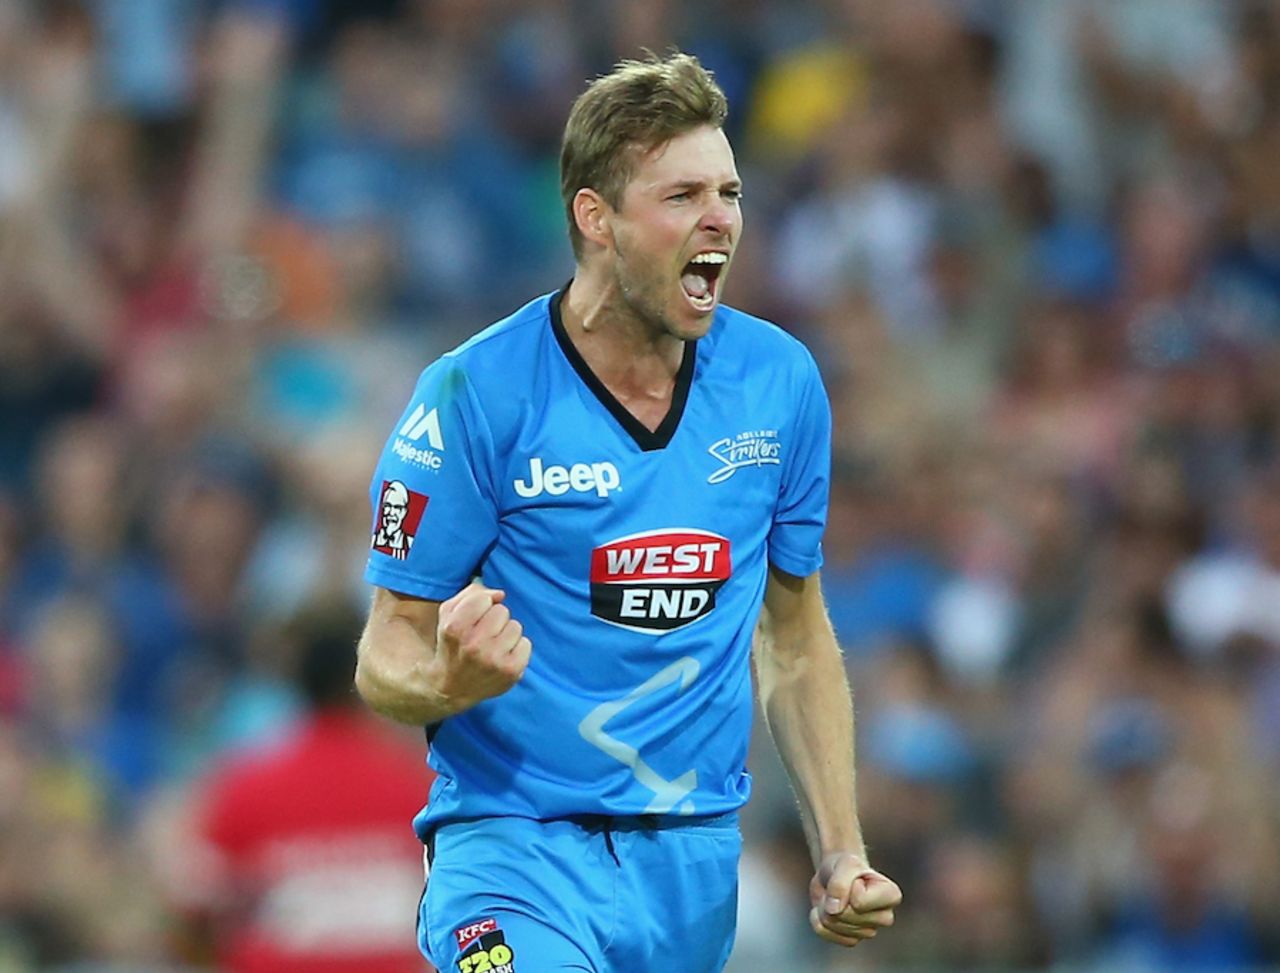 Ben Laughlin conceded 51 runs in four overs, Adelaide Strikers v Sydney Sixers, BBL 2014-15, semi-final, Adelaide, January 24, 2015